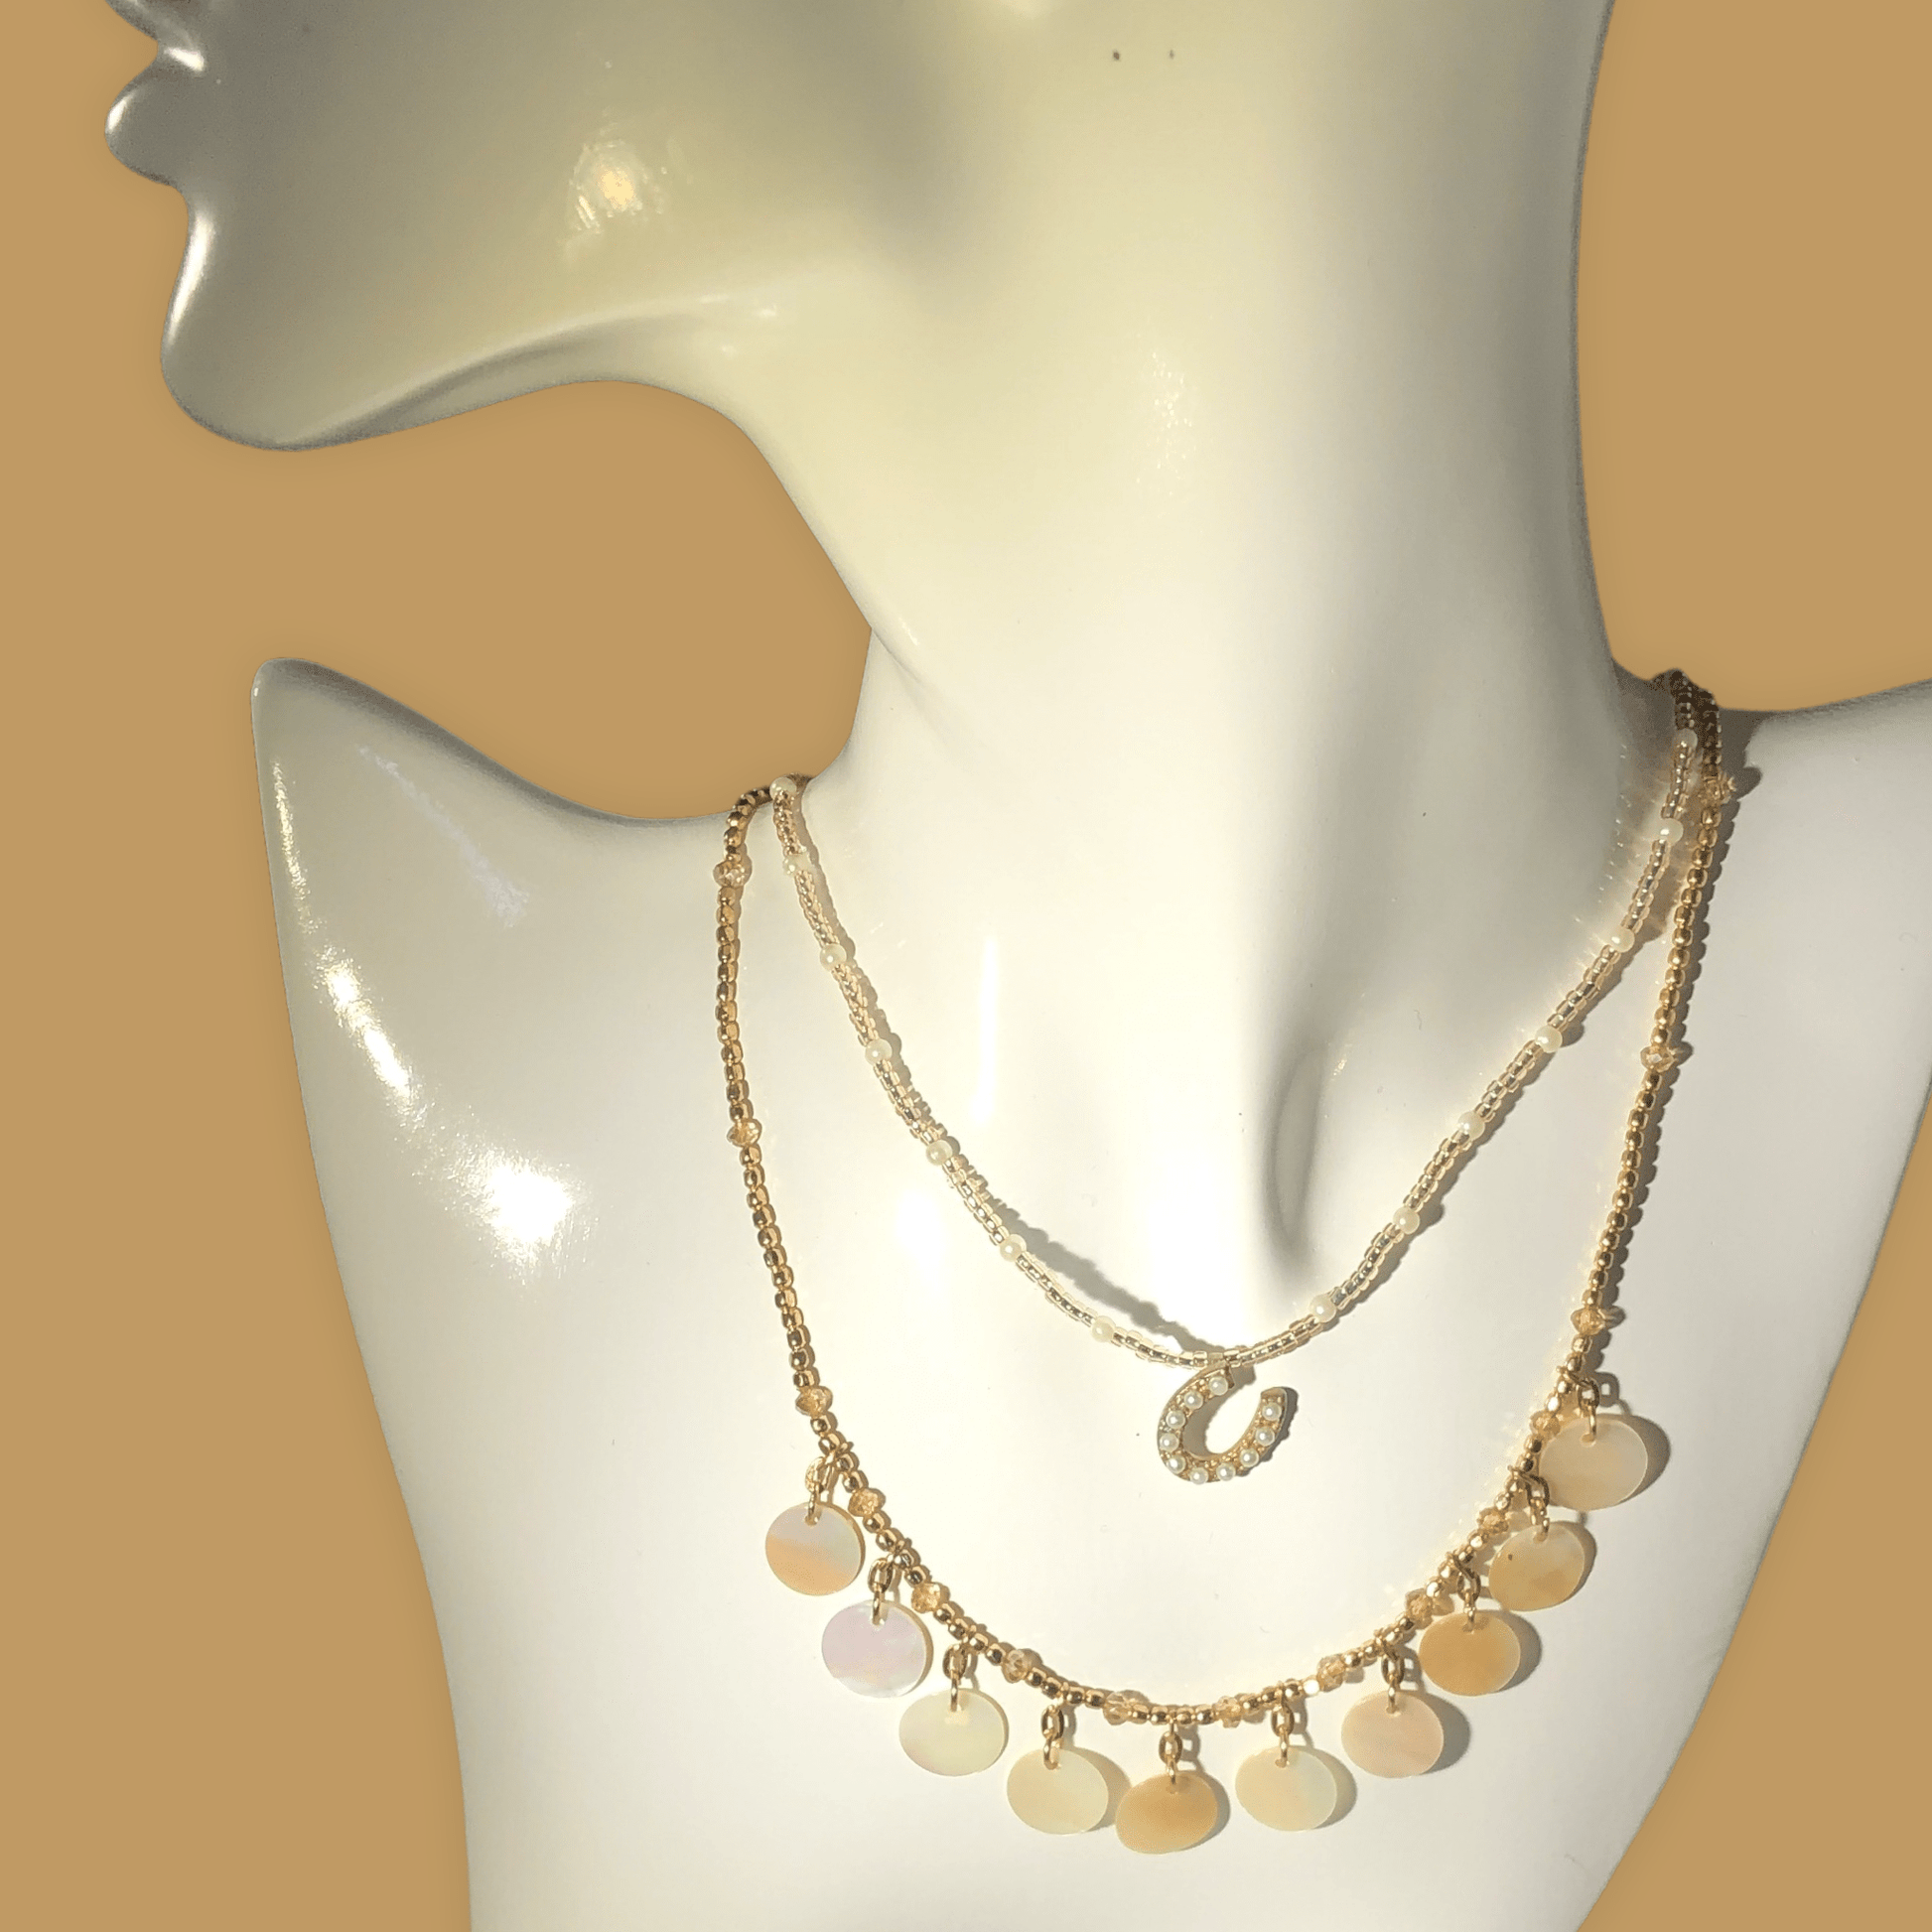 2 Beaded Choker Necklaces Bundle With Mother Of Pearl KAS WARWAS